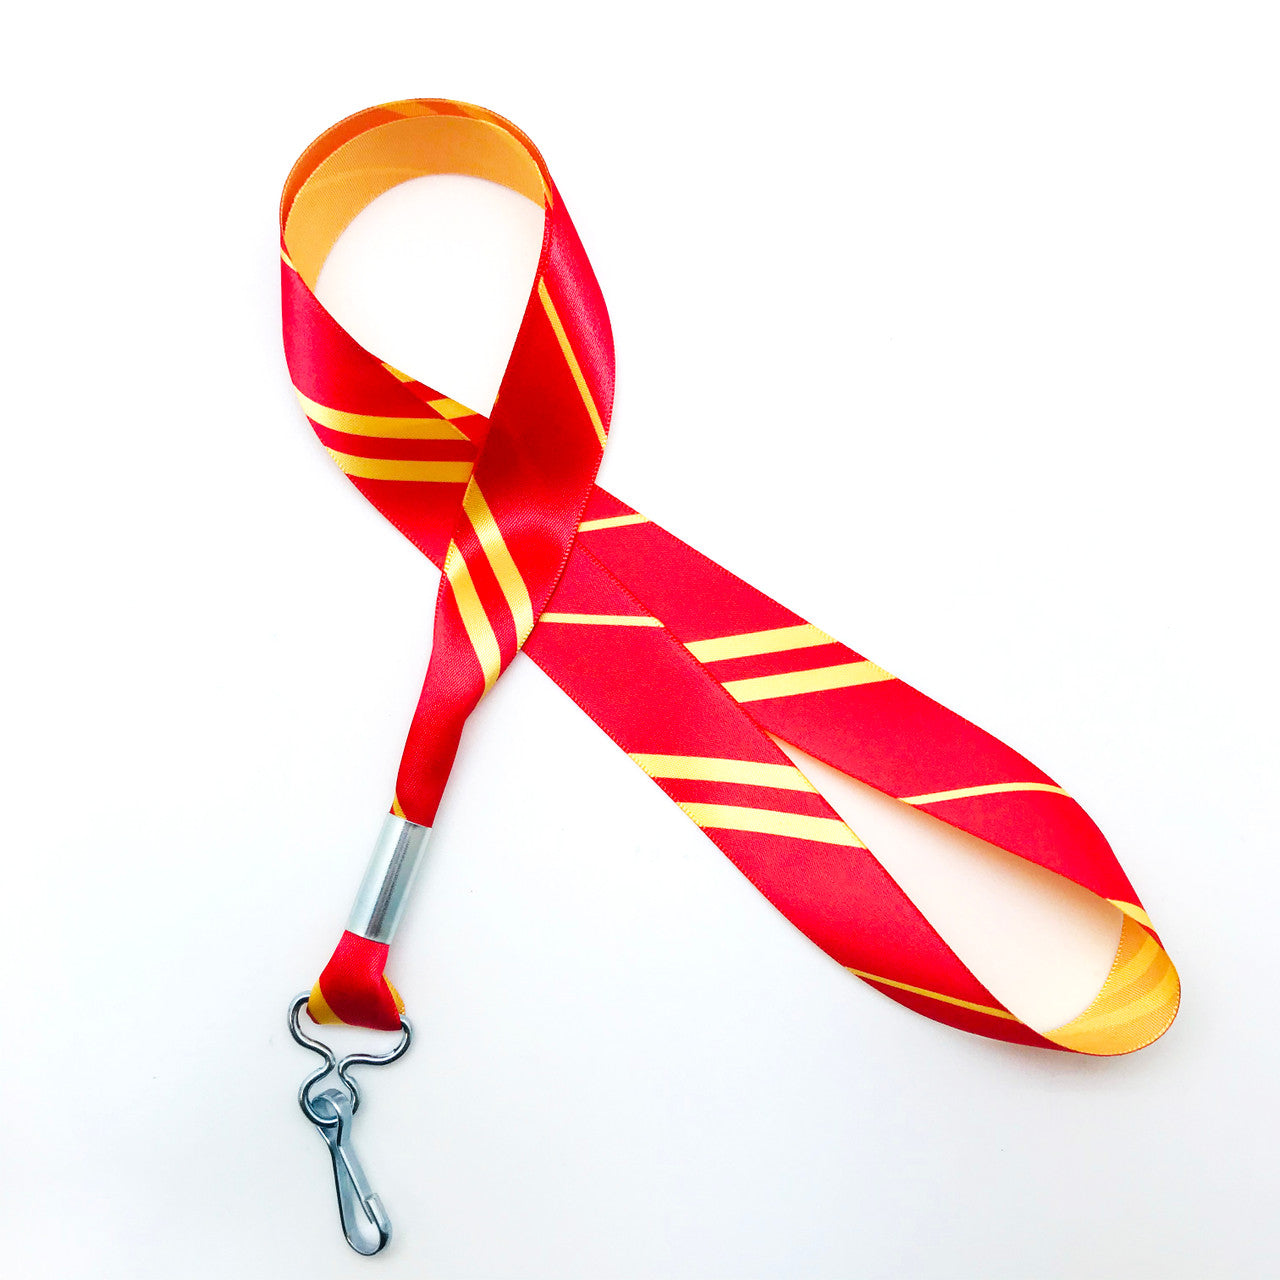 Ribbon lanyard in red and yellow  stripes printed on 7/8" yellow single face satin ribbon is a fun gift idea for all the Wizard fans on  your gift list. Perfect for events, parties and weddings too! All our products are designed, printed and assembled in the USA